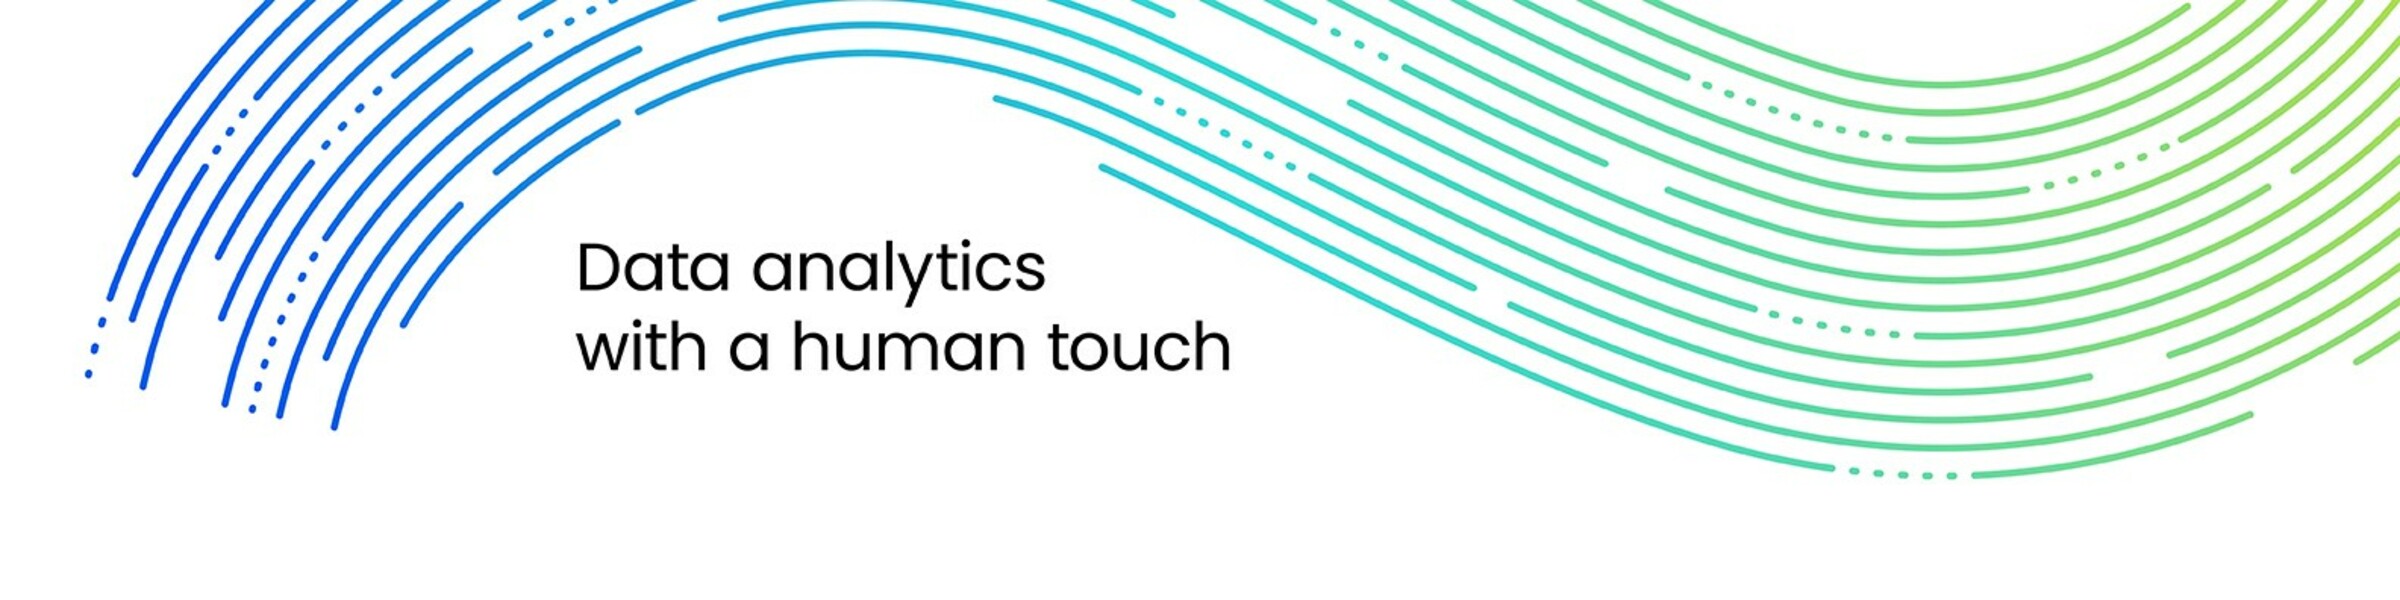 Data analytics with a human touch